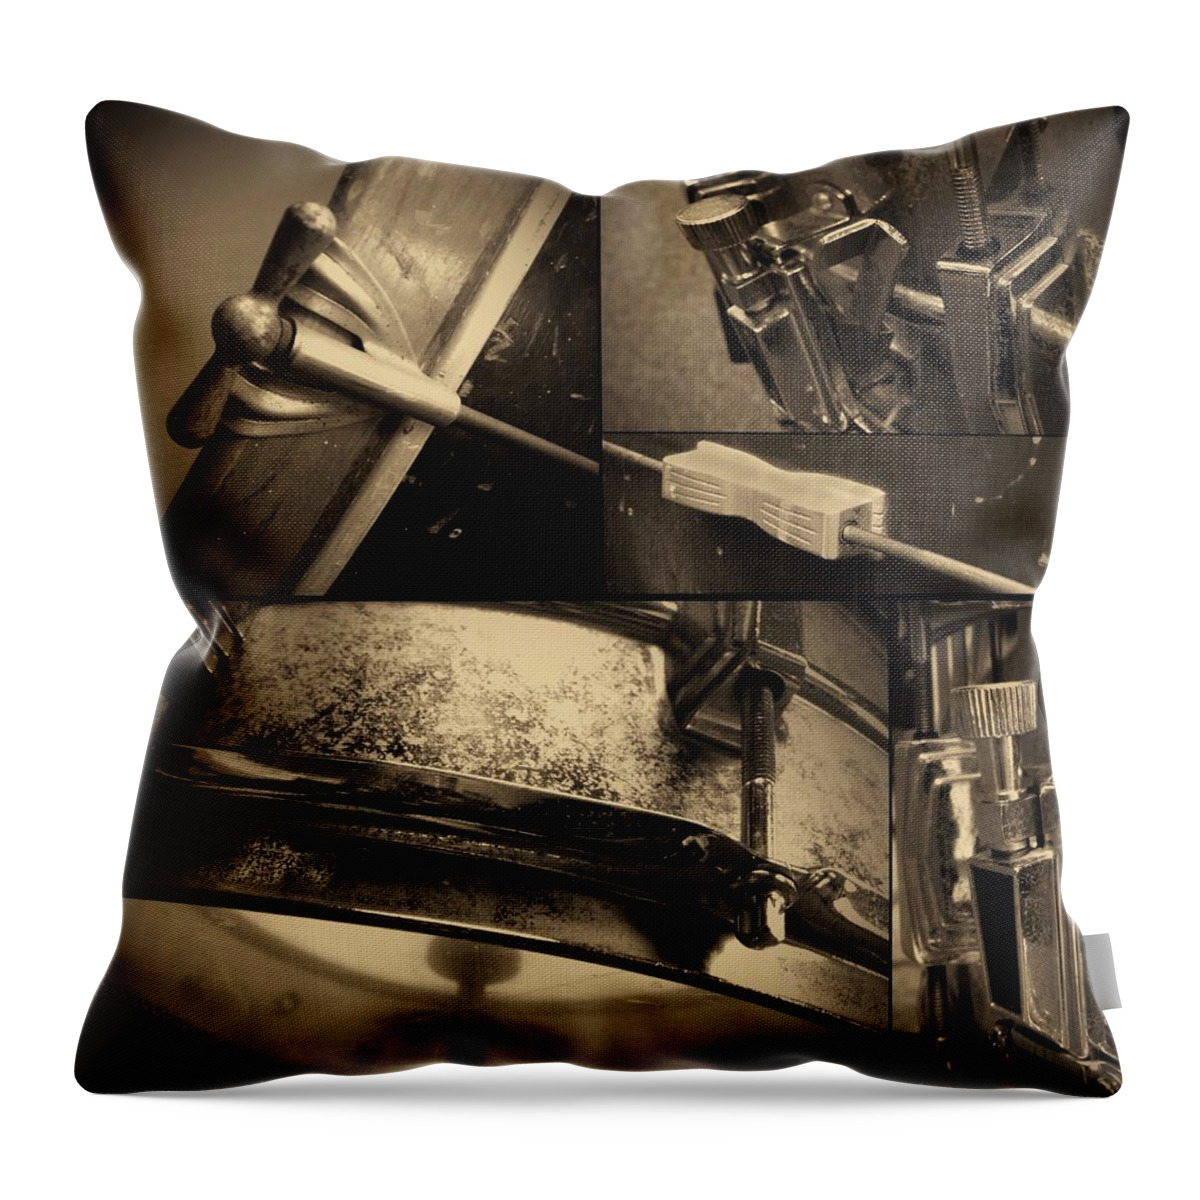 Drum Throw Pillow featuring the photograph Keeping Time by Photographic Arts And Design Studio